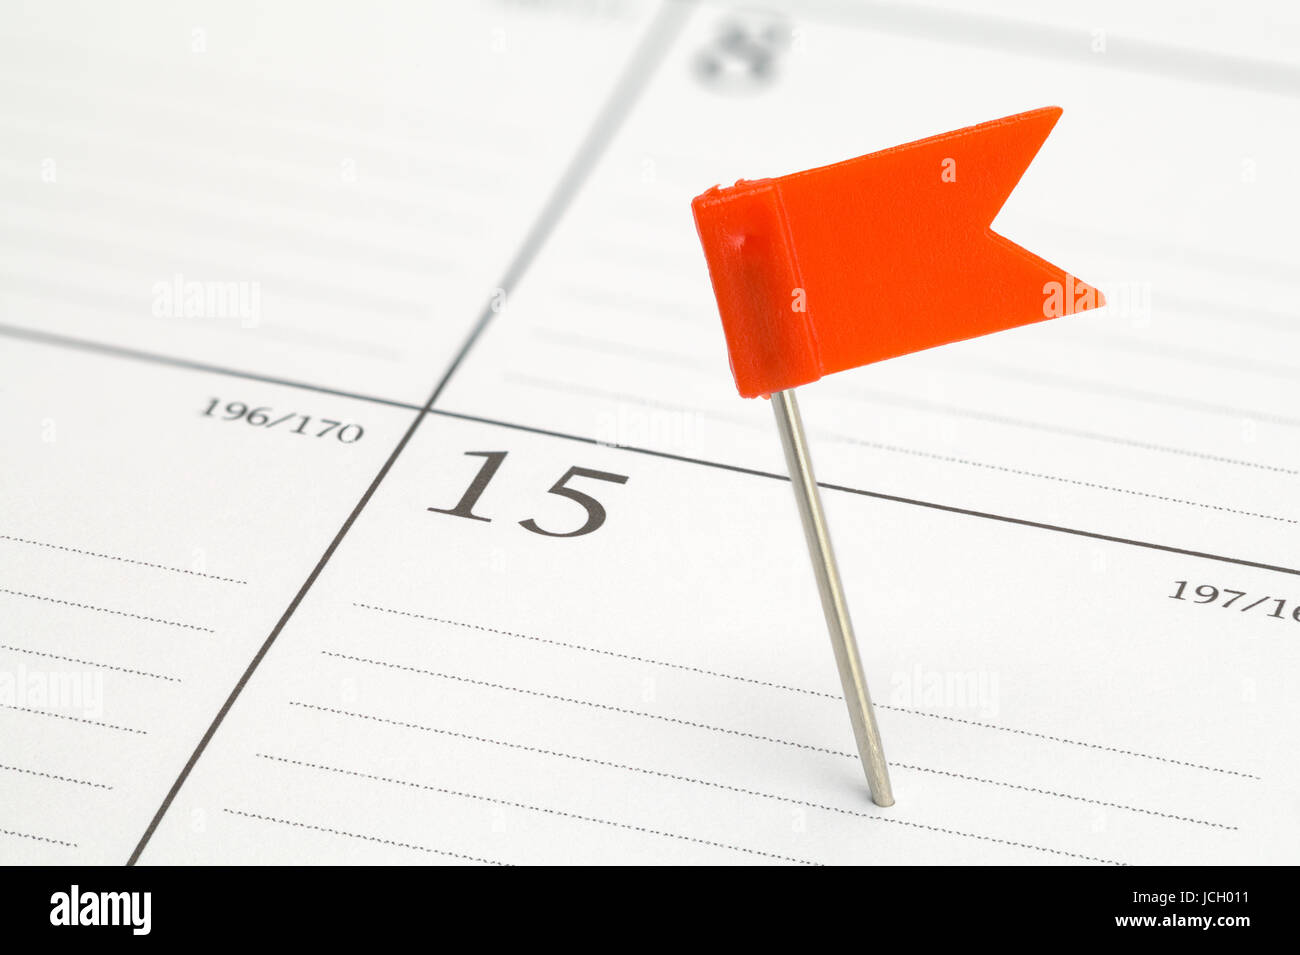 Red Flag Pin Stuck in Calendar Date. Stock Photo